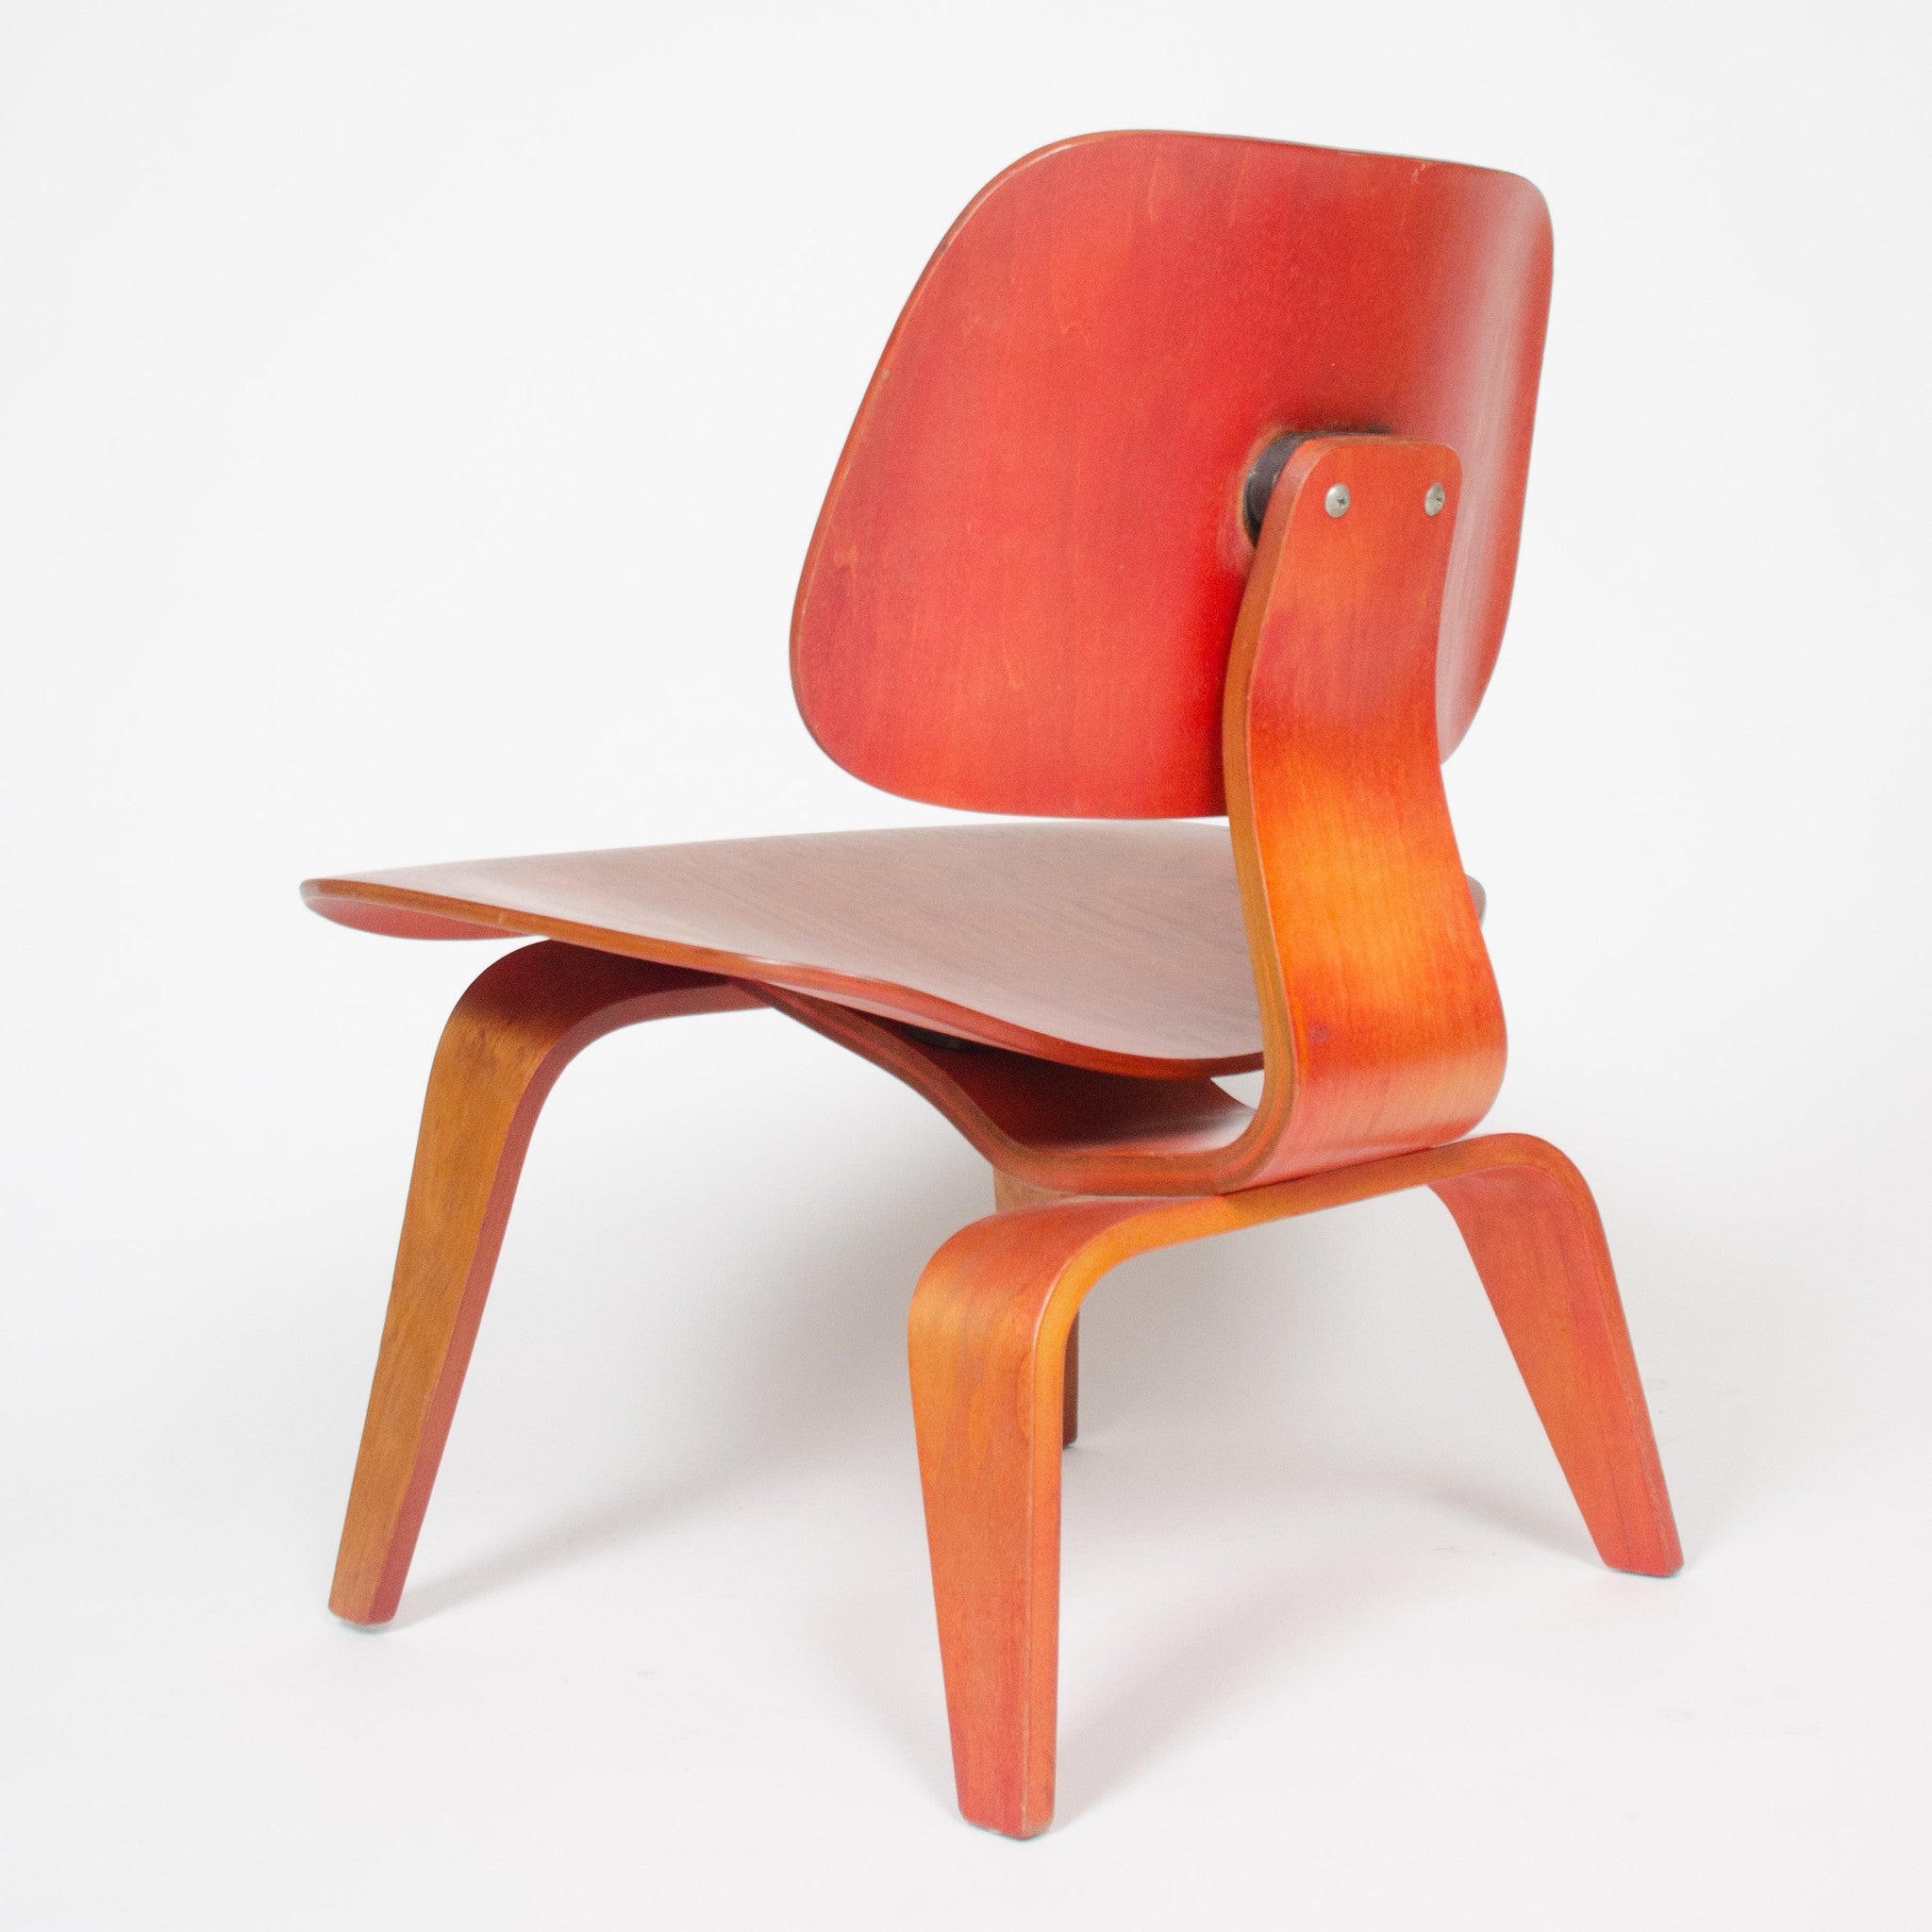 SOLD Eames Herman Miller 1950 LCW Early Red Aniline, All Original Lounge Chair